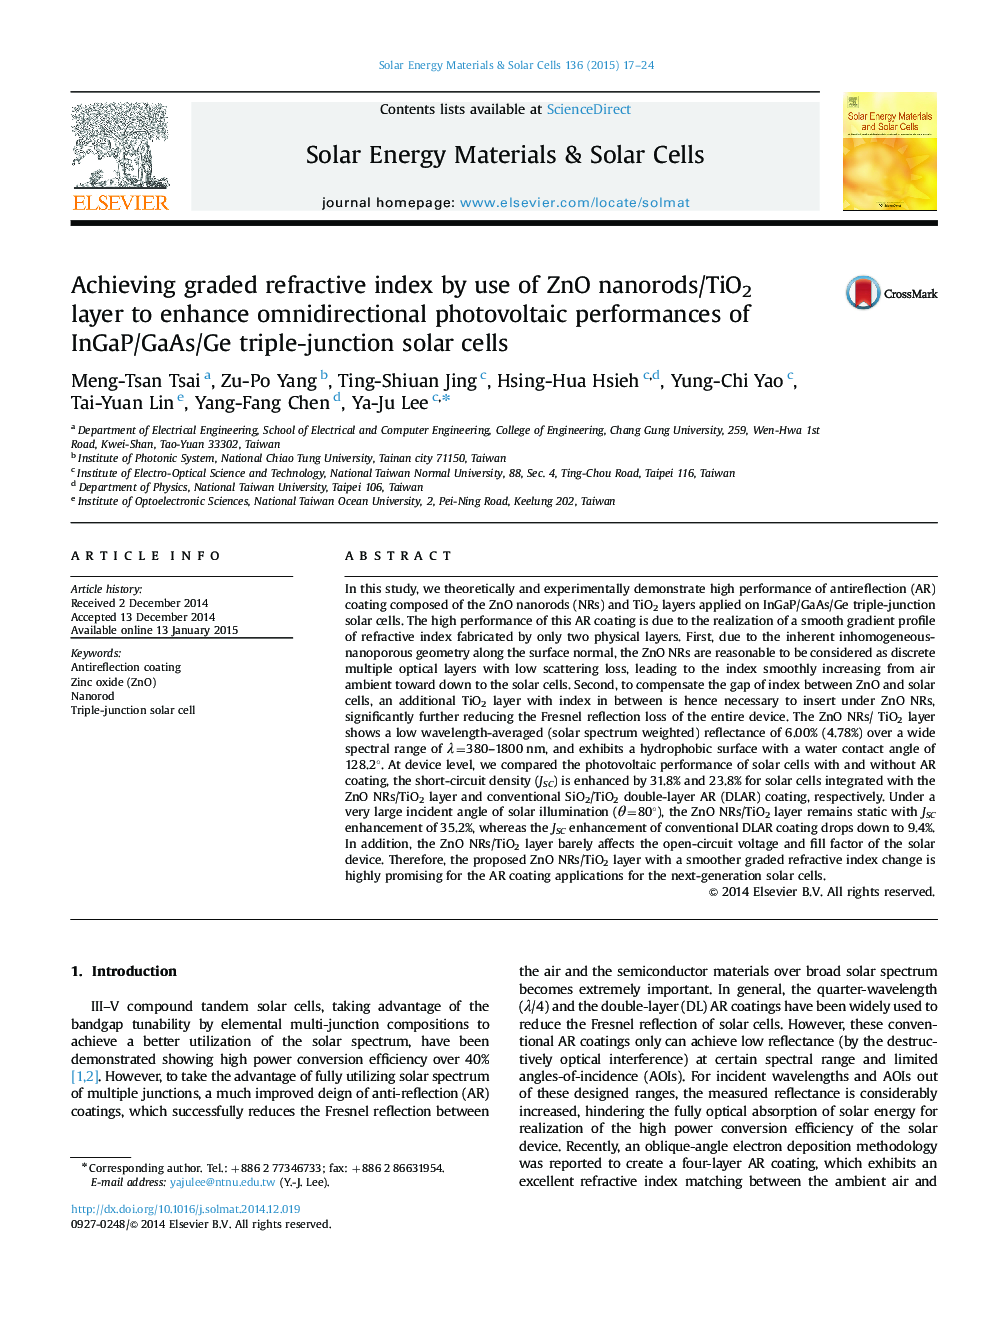 Achieving graded refractive index by use of ZnO nanorods/TiO2 layer to enhance omnidirectional photovoltaic performances of InGaP/GaAs/Ge triple-junction solar cells